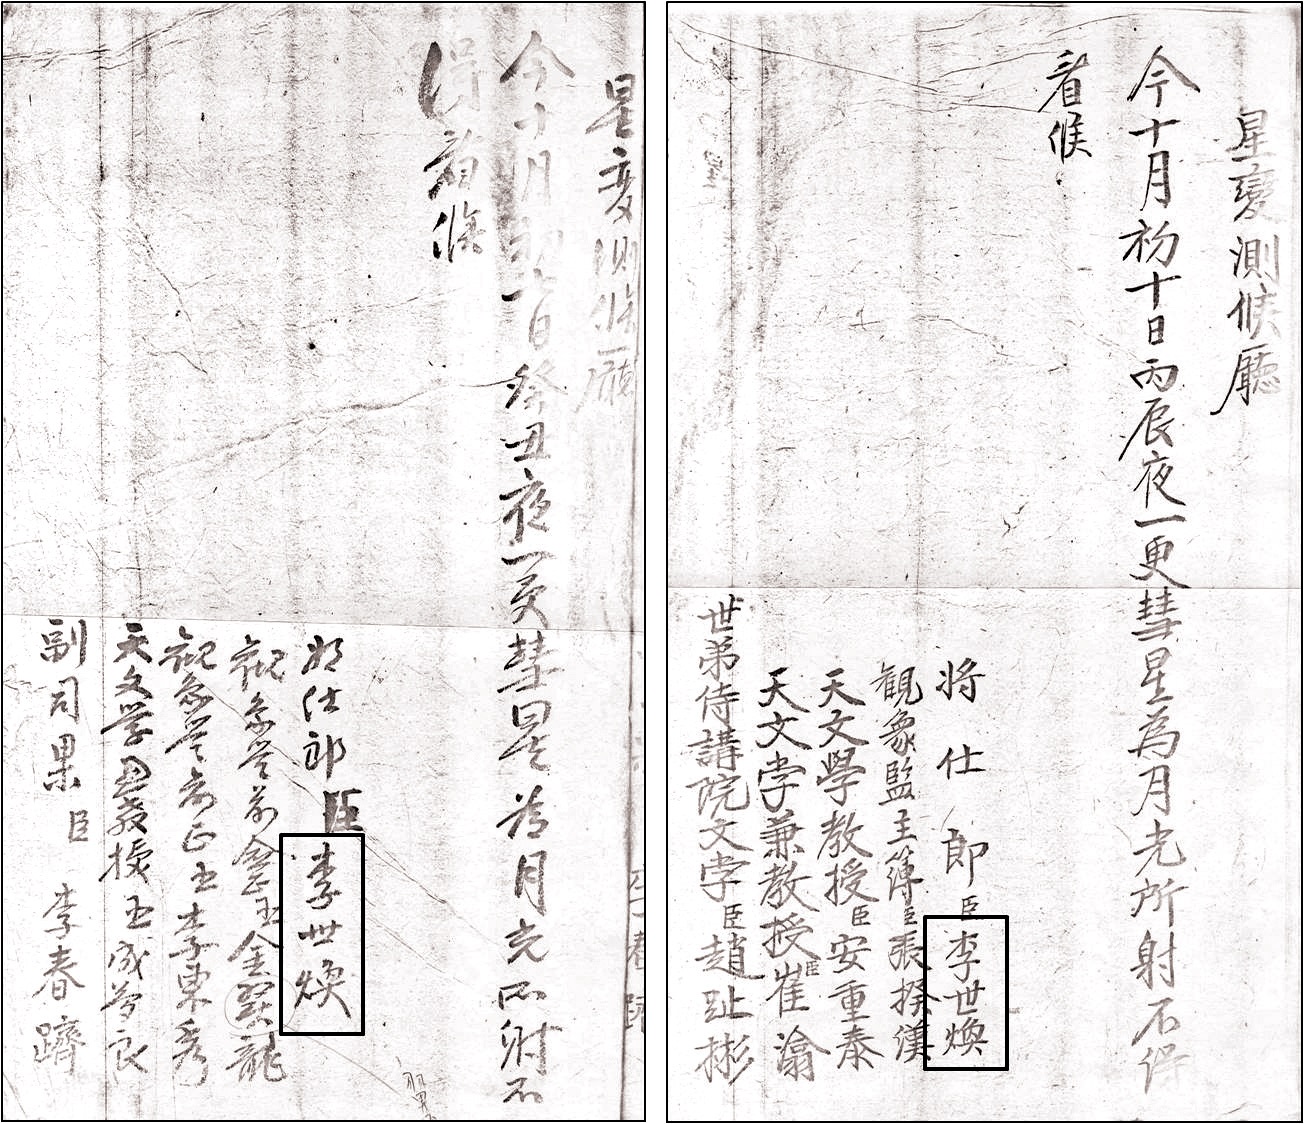 Two comet records on the seventh and the tenth days of the tenth month of the 1723 SeongbyeonDeungrok. Yi Se-whan (李世煥)’s name is seen on both days (Courtesy of Yonsei University Library).